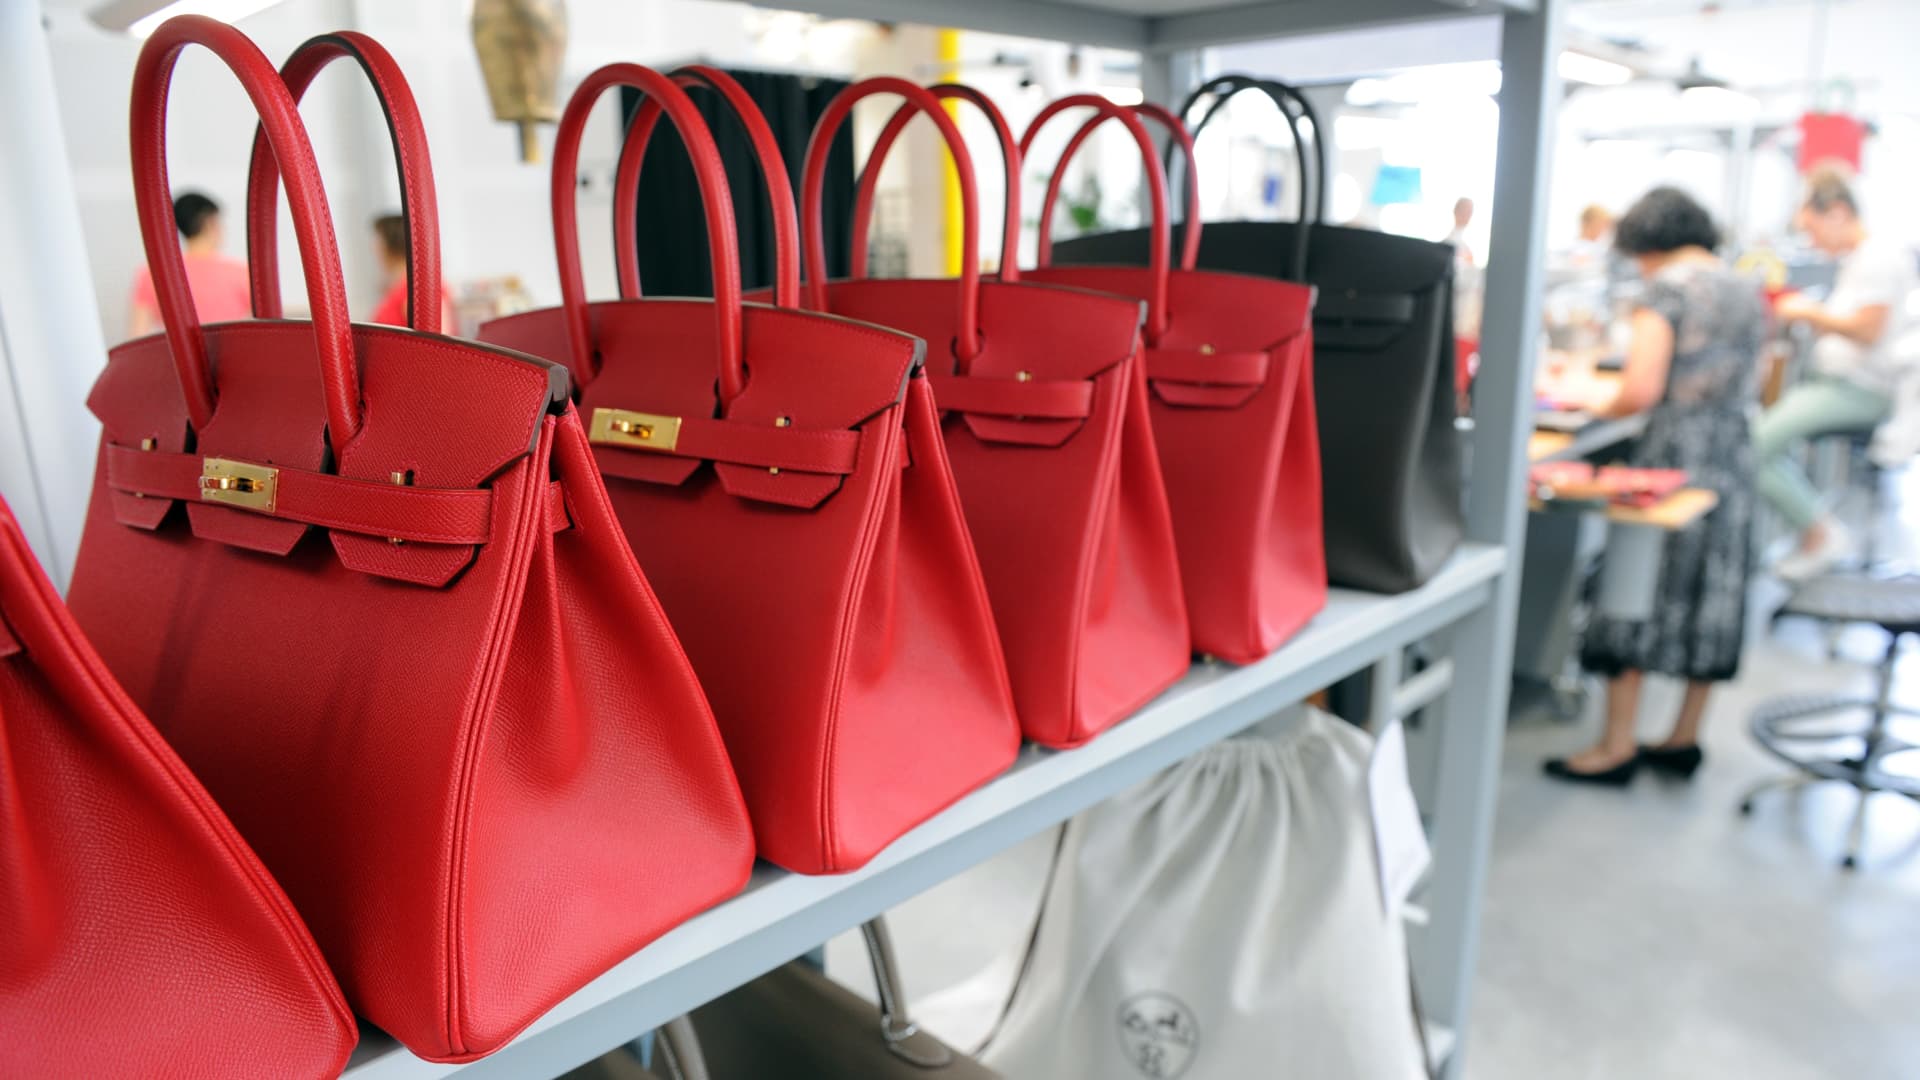 Handbags were the hottest investment for the rich last year